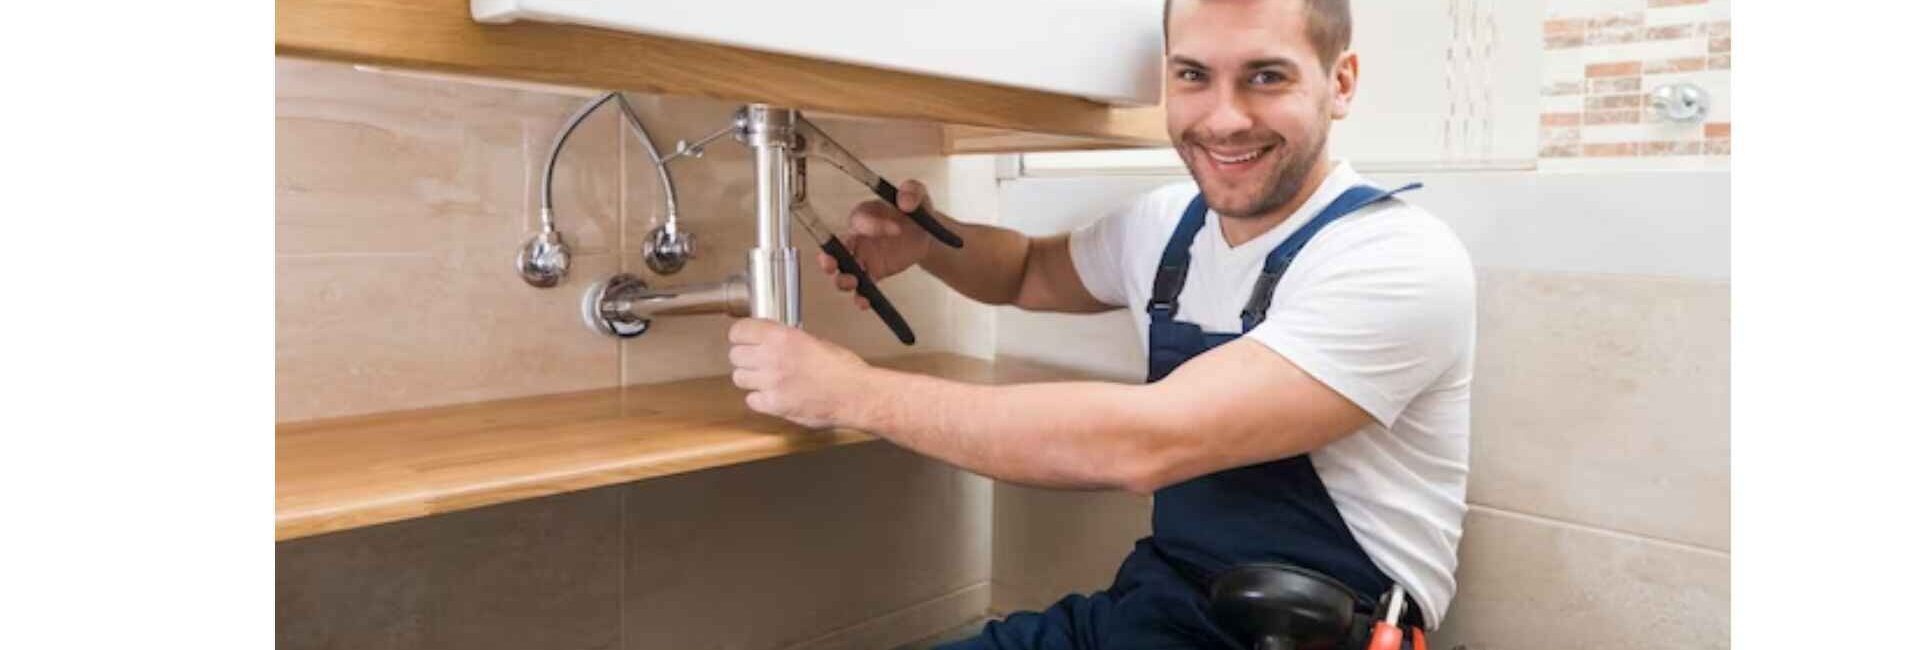 Plumbing and electrical services - Plumber Service Provider in Noida